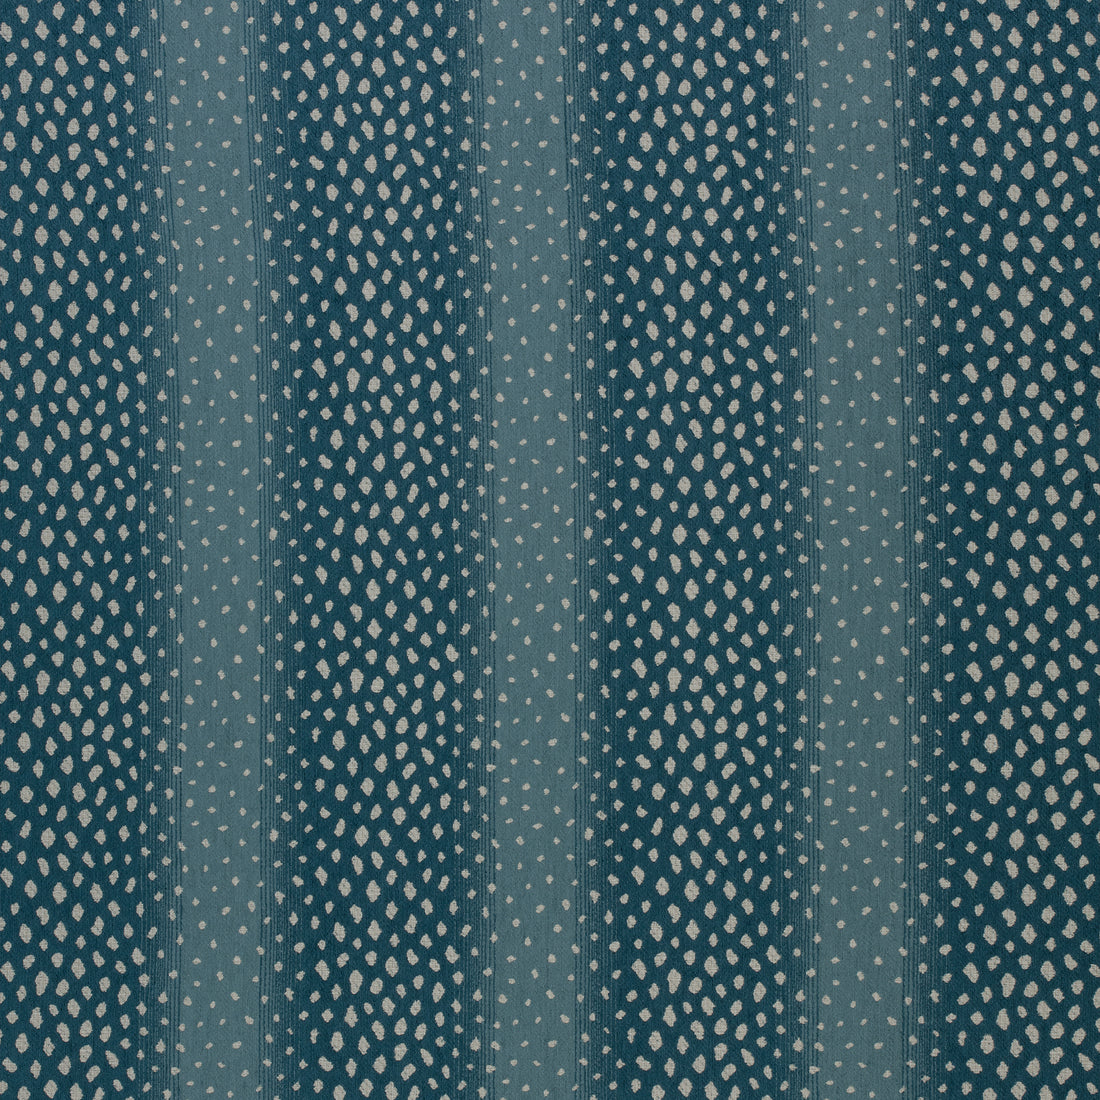 Gazelle fabric in peacock color - pattern number W80428 - by Thibaut in the Woven Resource Vol 10 Menagerie collection